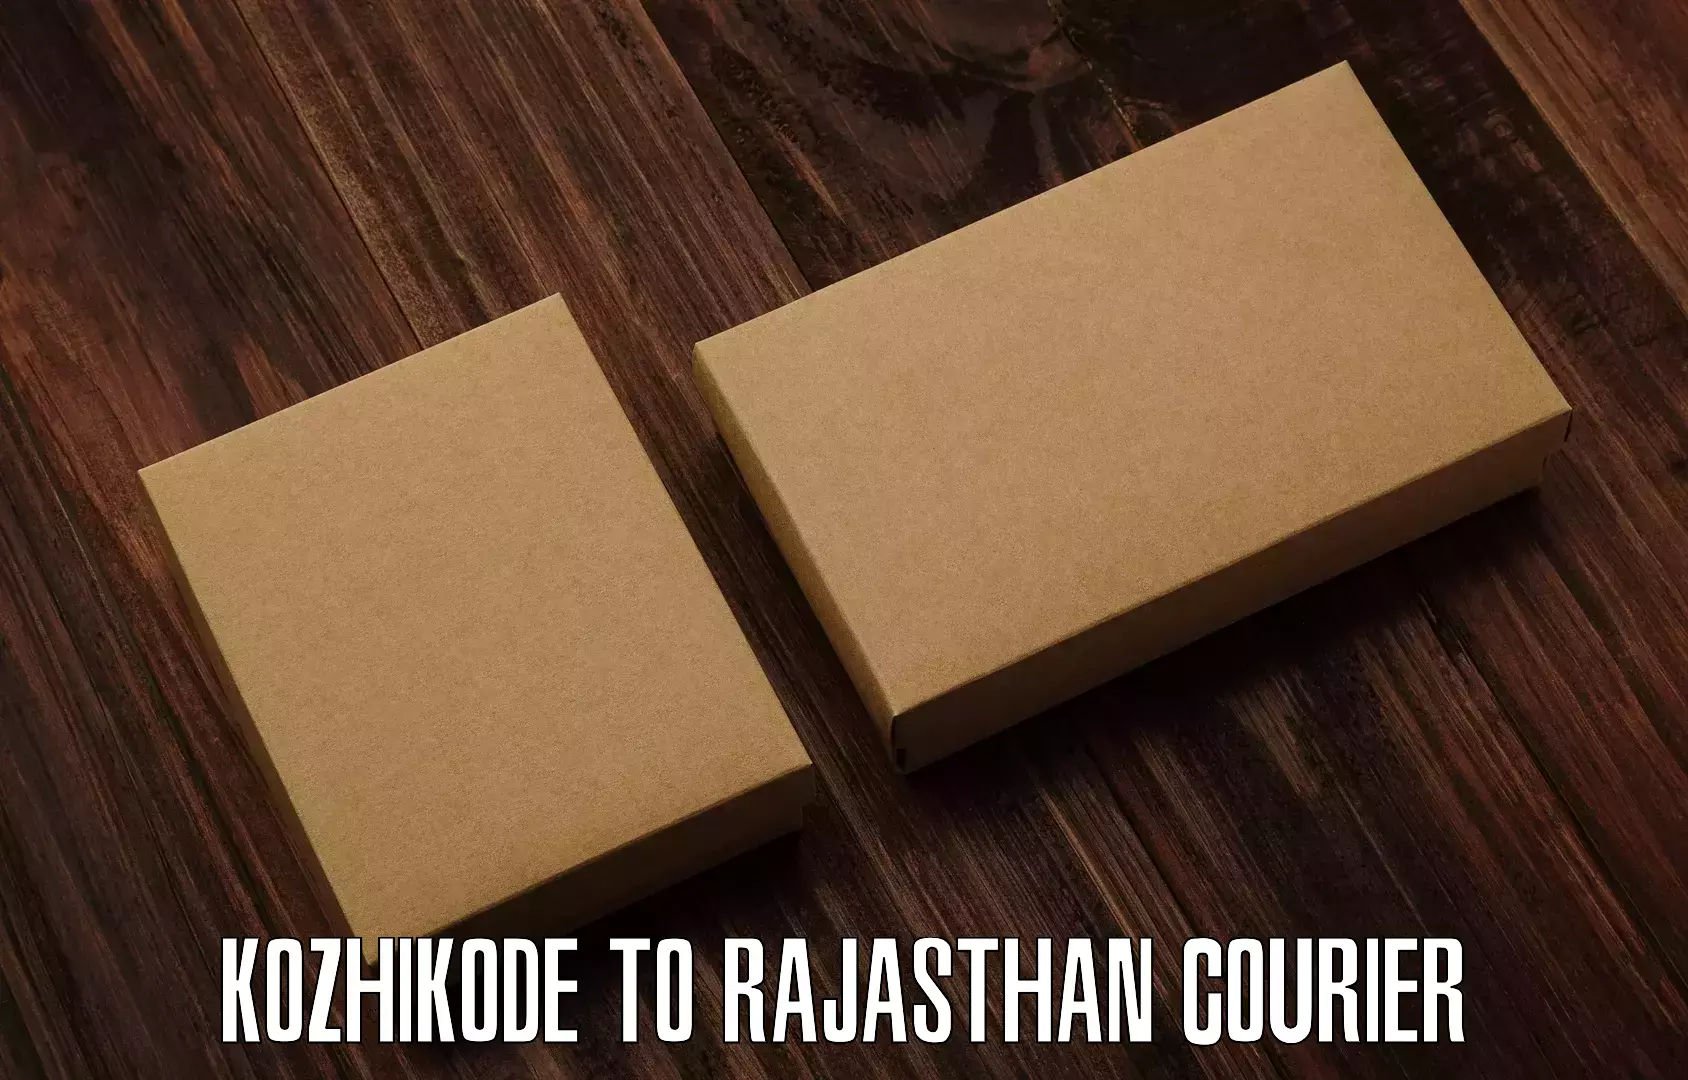 Easy access courier services in Kozhikode to Itawa